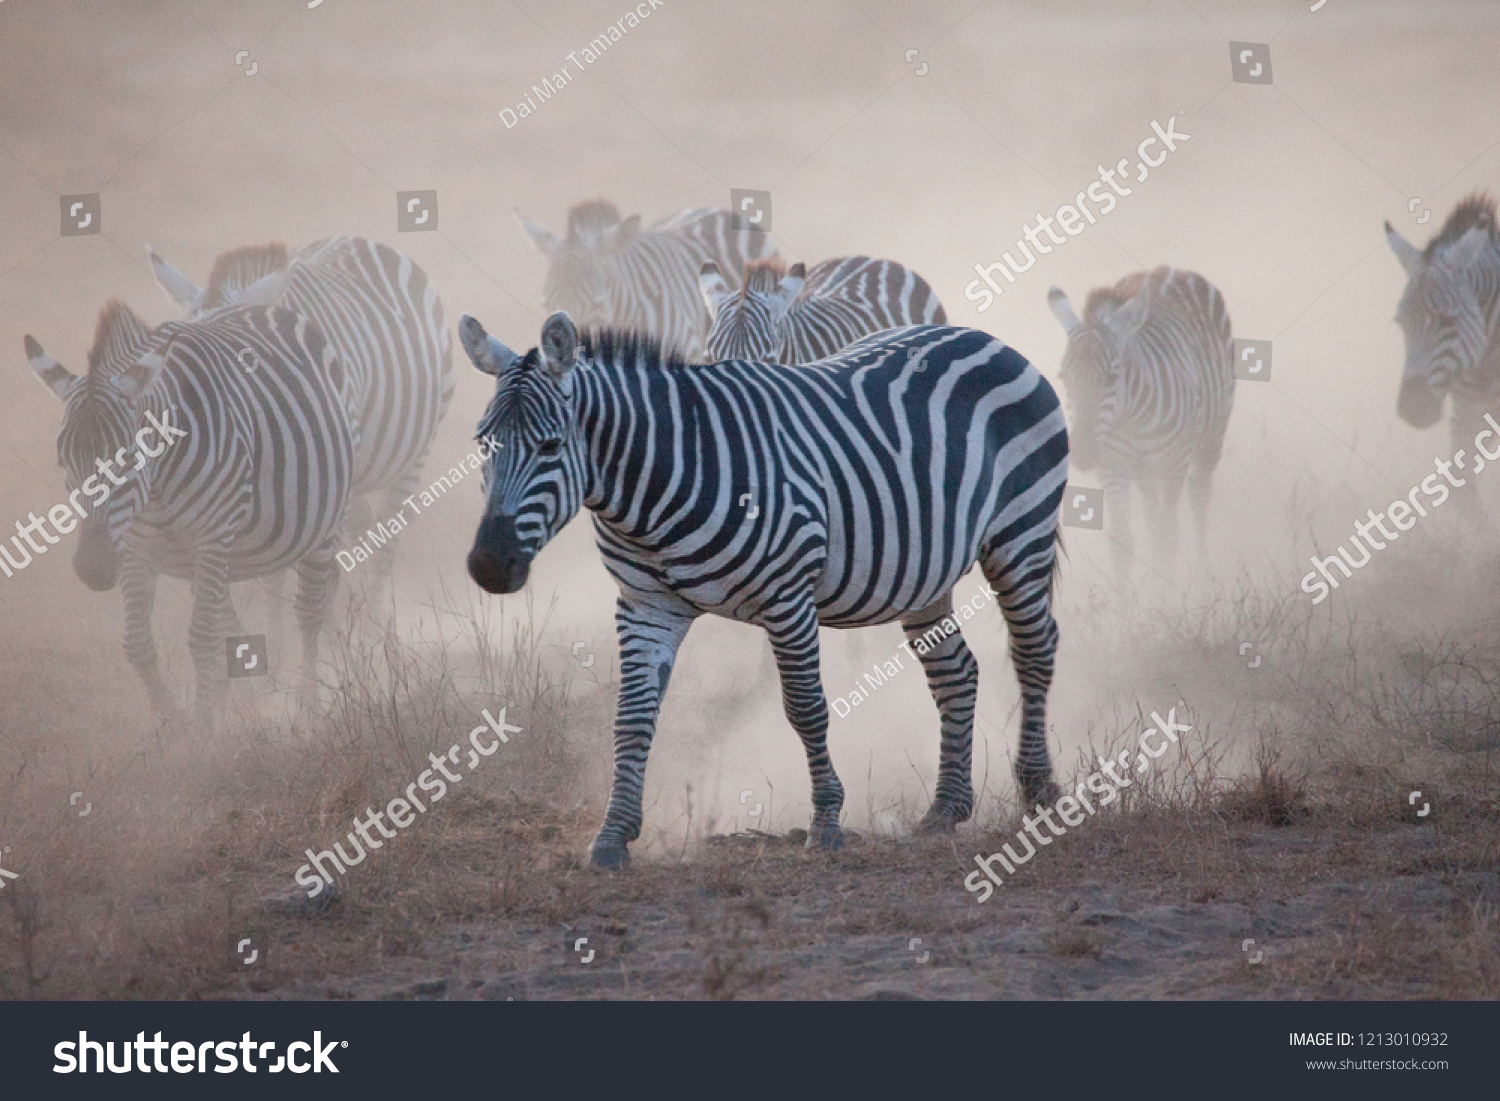 Zebras and Wildebeests Emerging from a Dust Cloud in Africa #1213010932